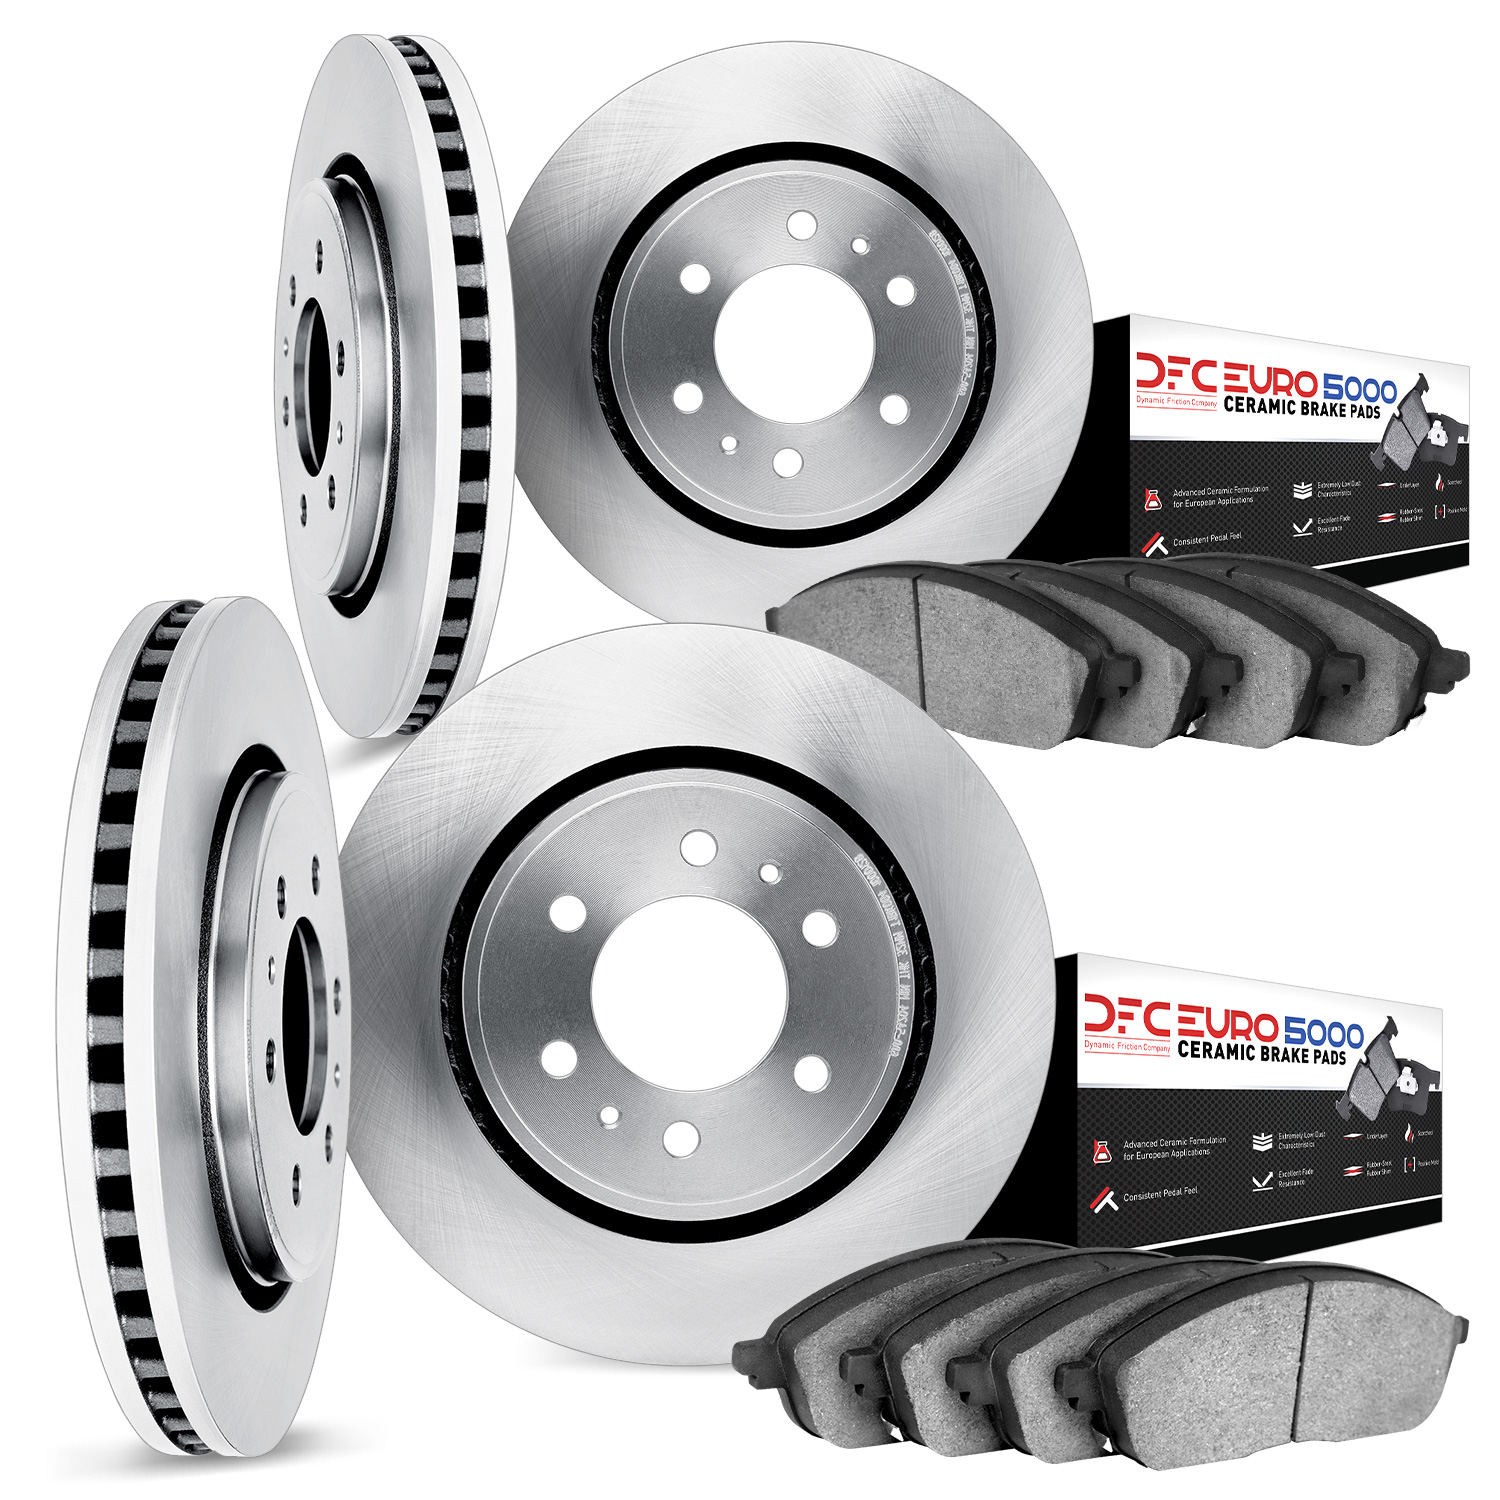 6604-11338 Brake Rotors w/5000 Euro Ceramic Brake Pads, 2006-2009 GM, Position: Front and Rear